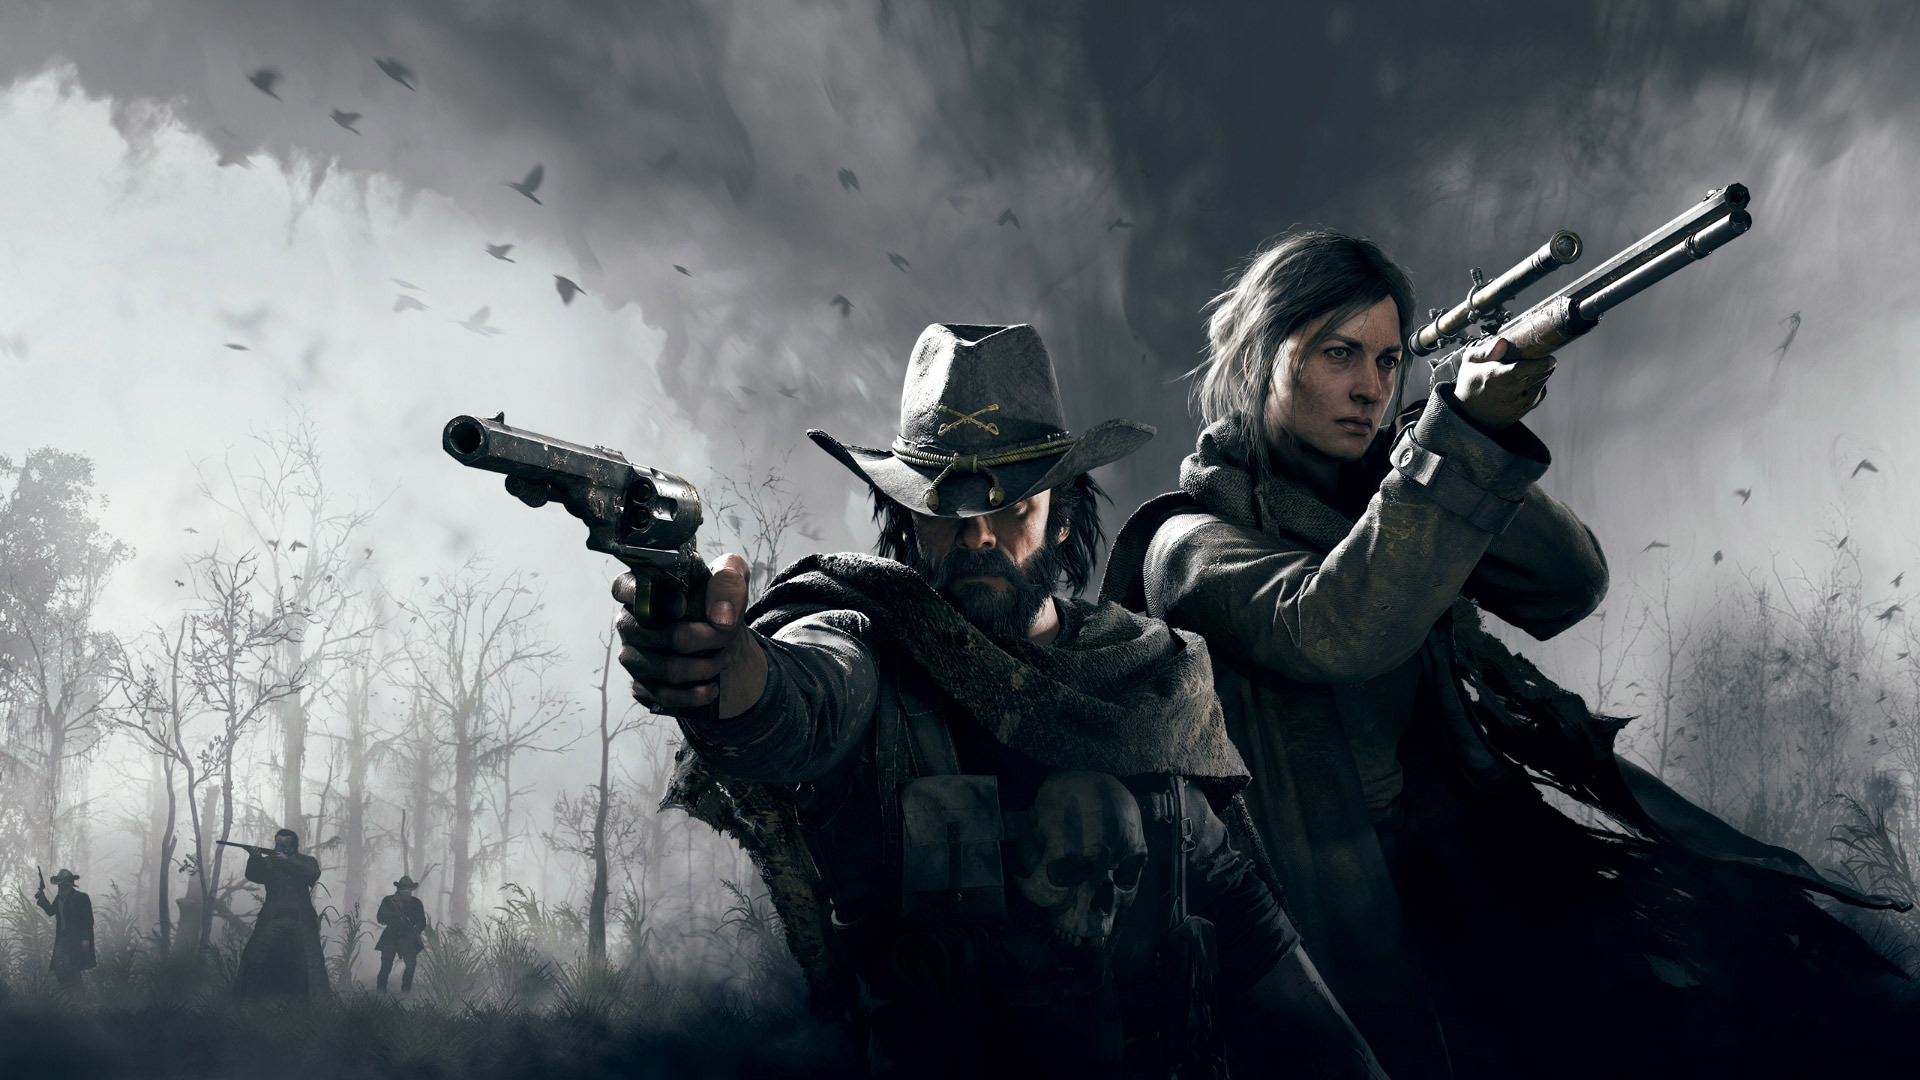 Hunt: Showdown Won't Work on PS4 or Xbox One From August